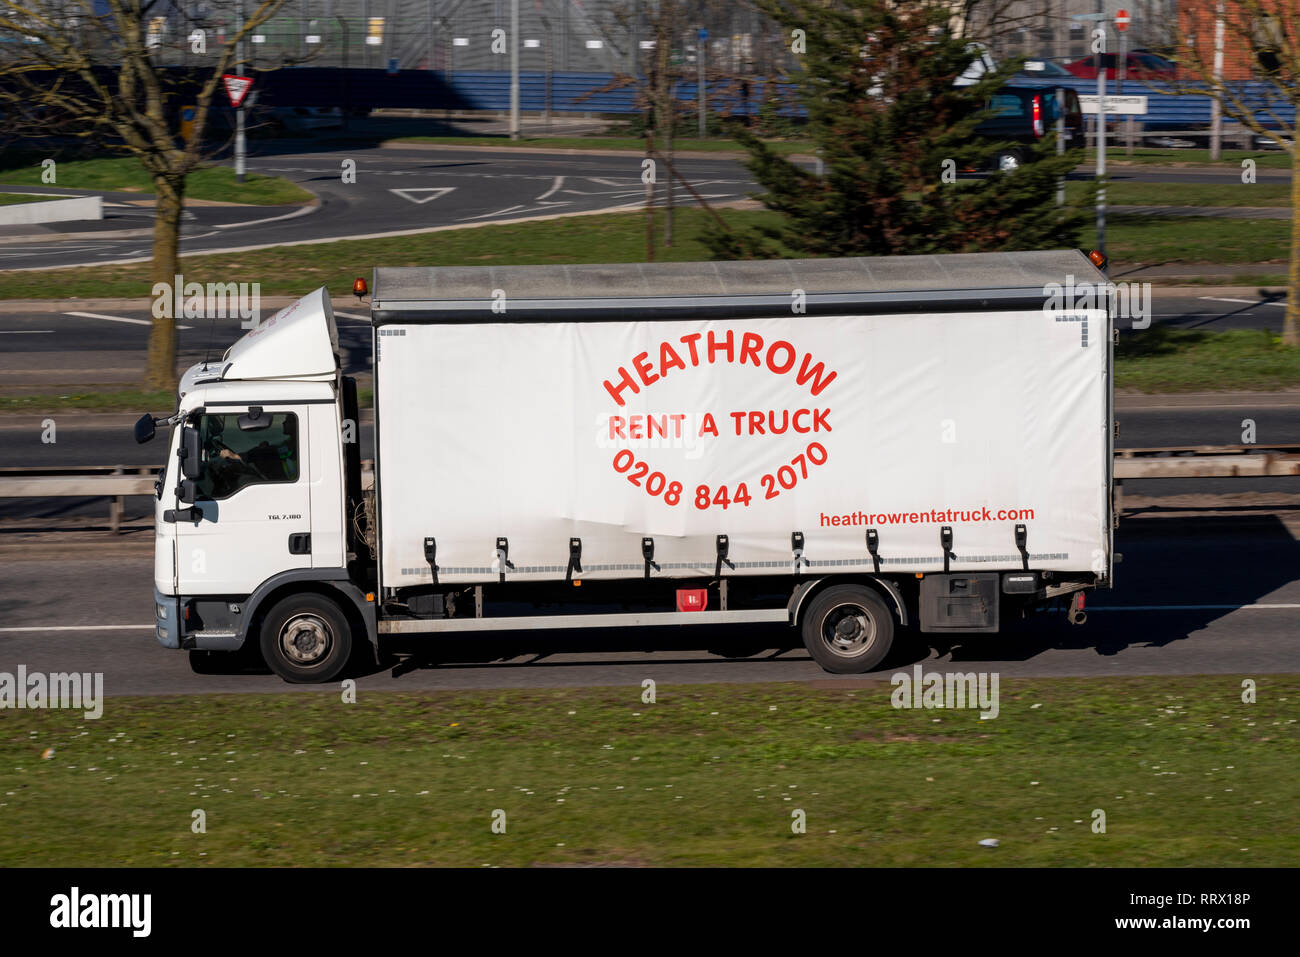 Heathrow Rent A Truck. MAN TGL tautliner, curtainsider, curtain sided vehicle, lorry. Hire company Stock Photo